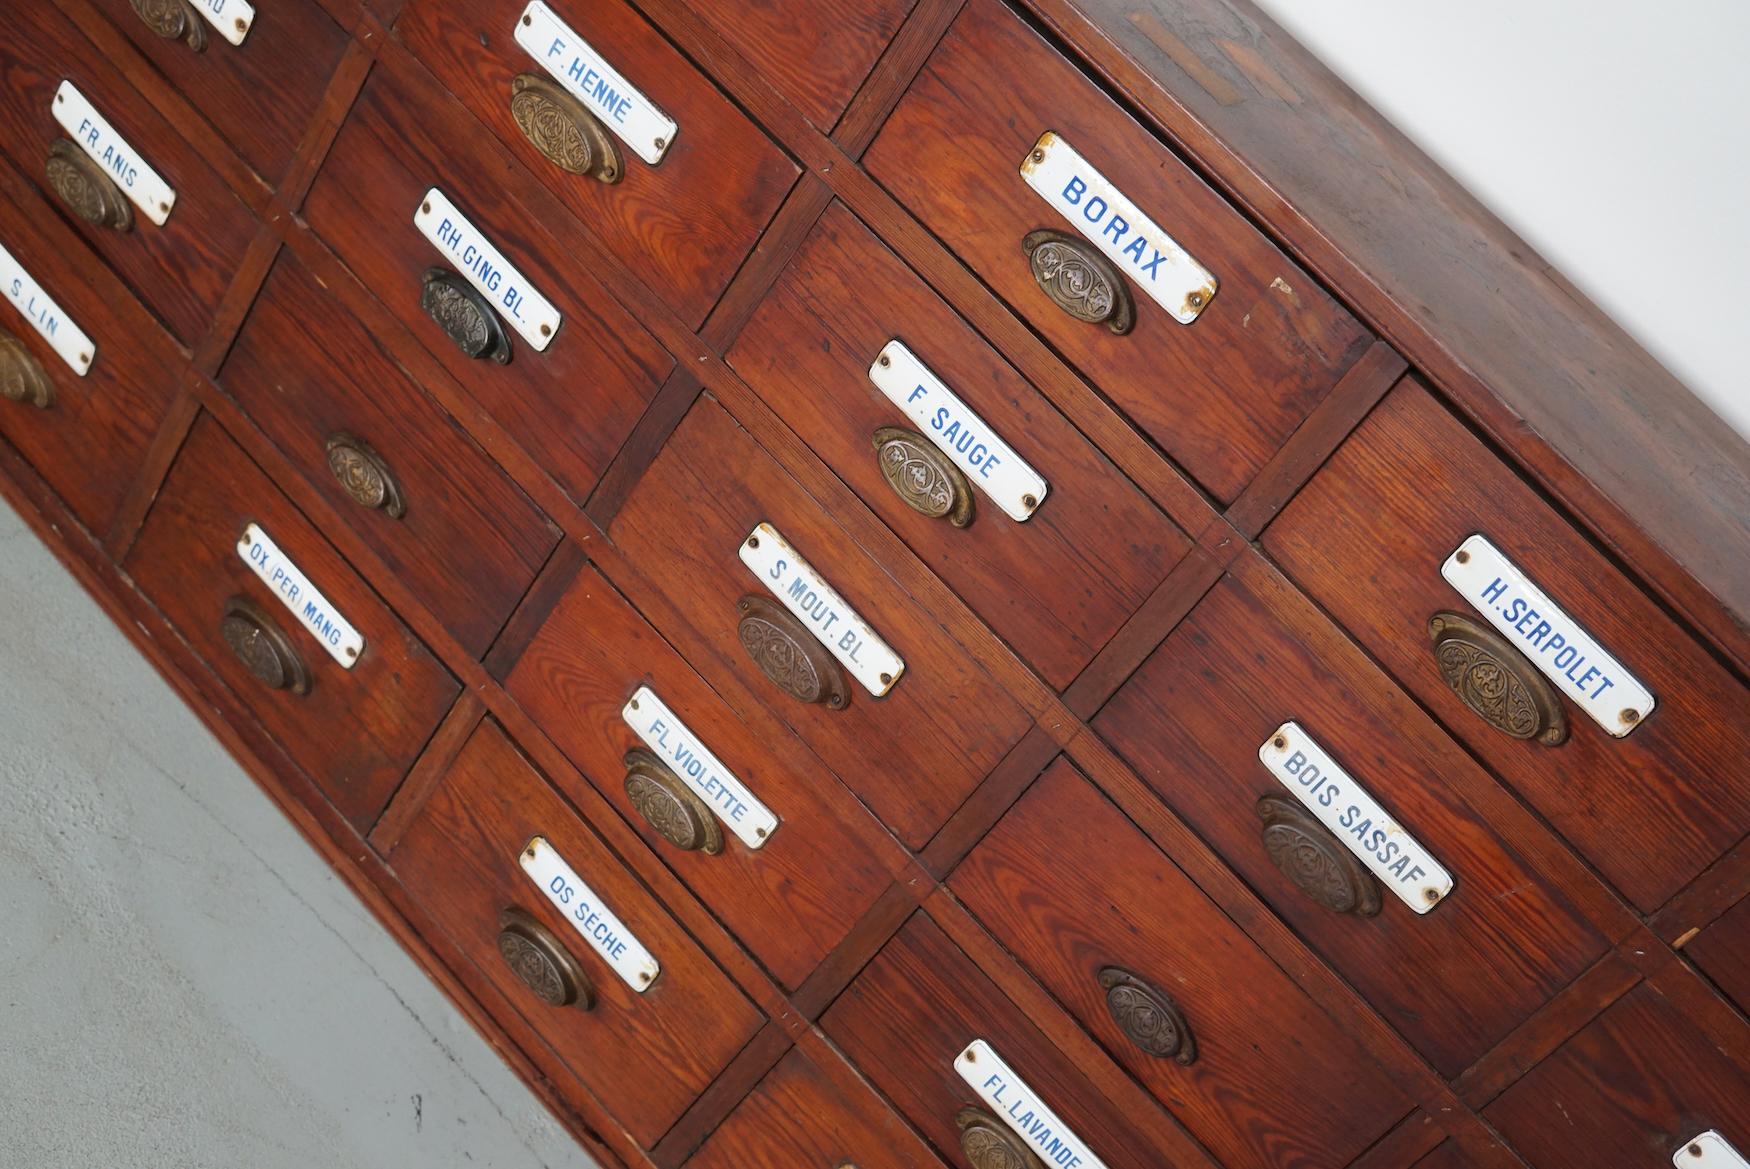  Large Antique Belgian Pitch Pine Apothecary Cabinet with Enamel Shields, 1900s For Sale 1